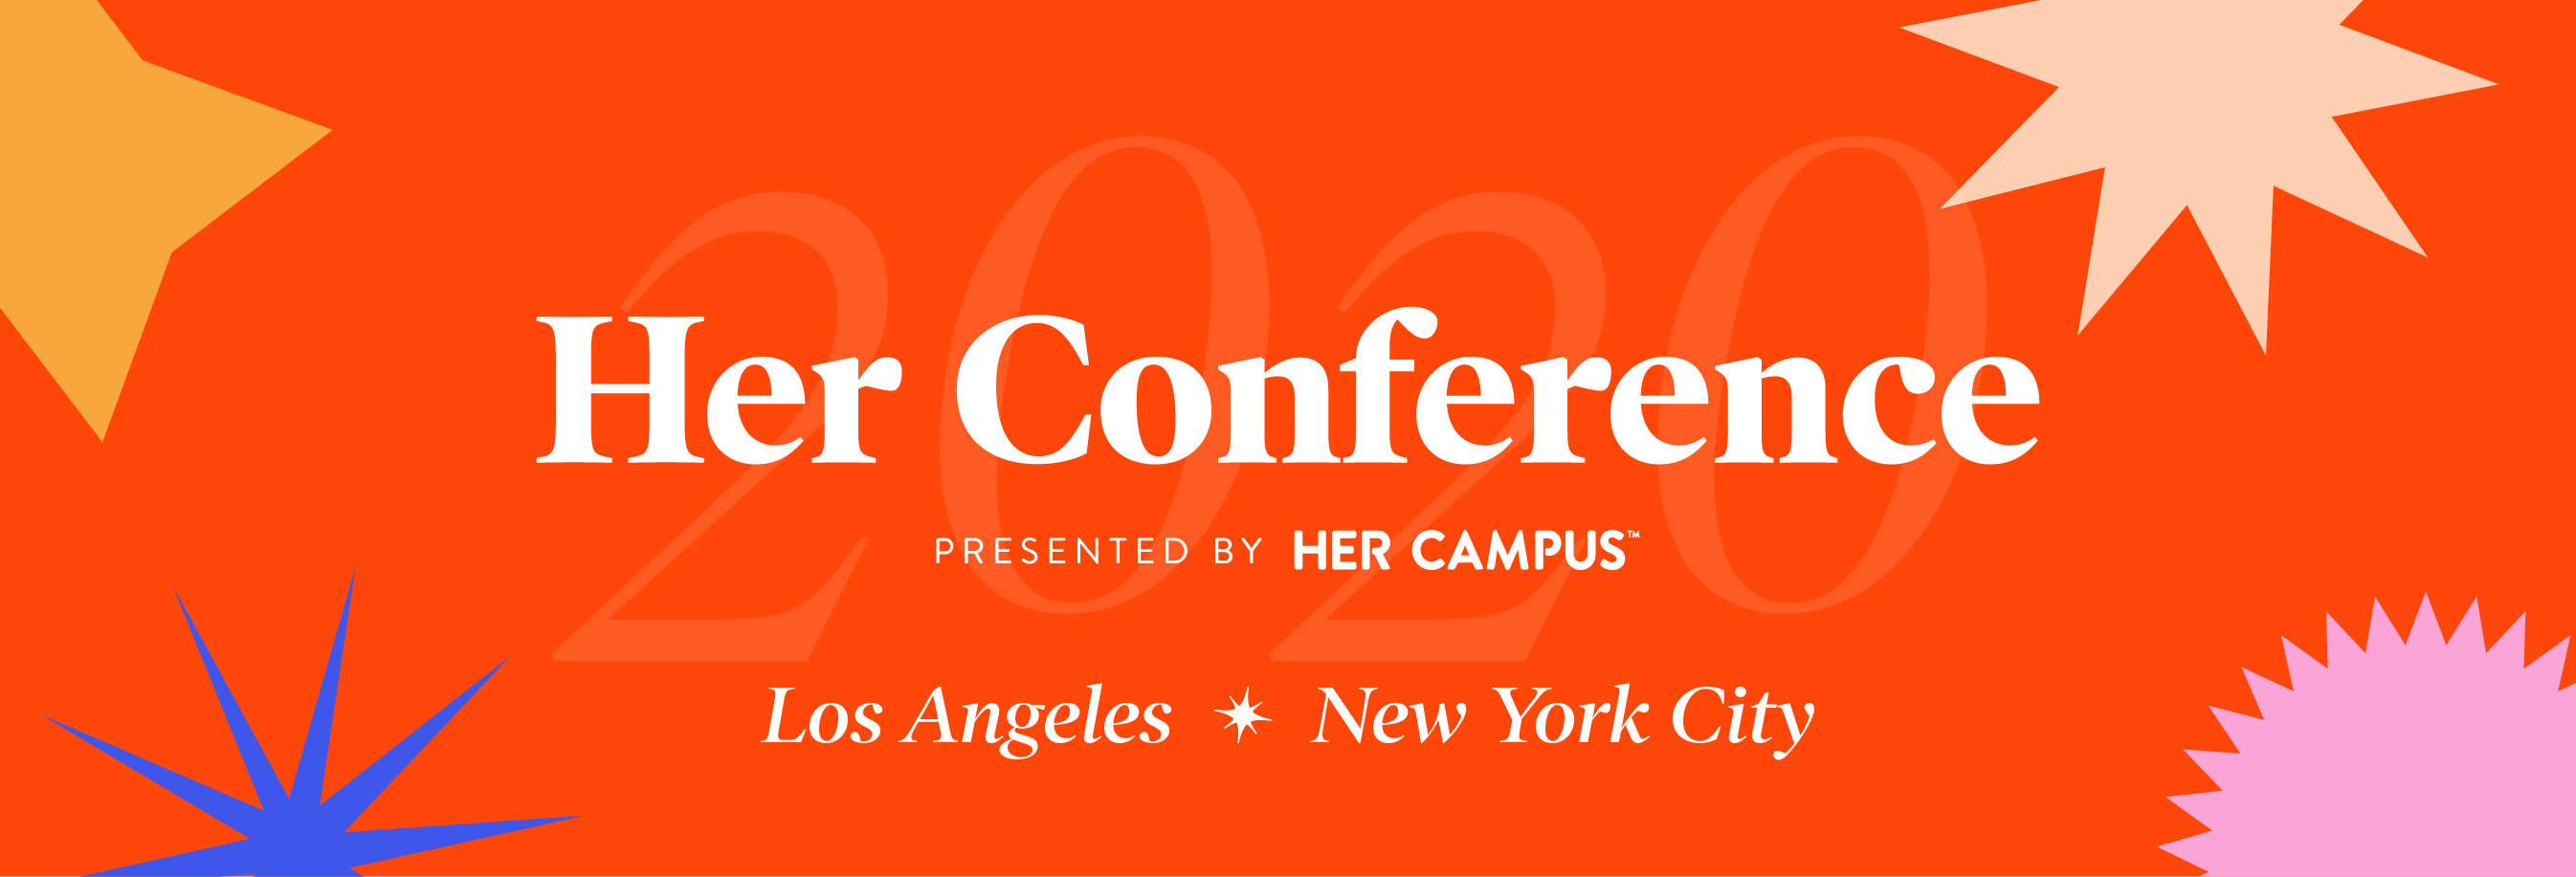 Her Conference LA 2020